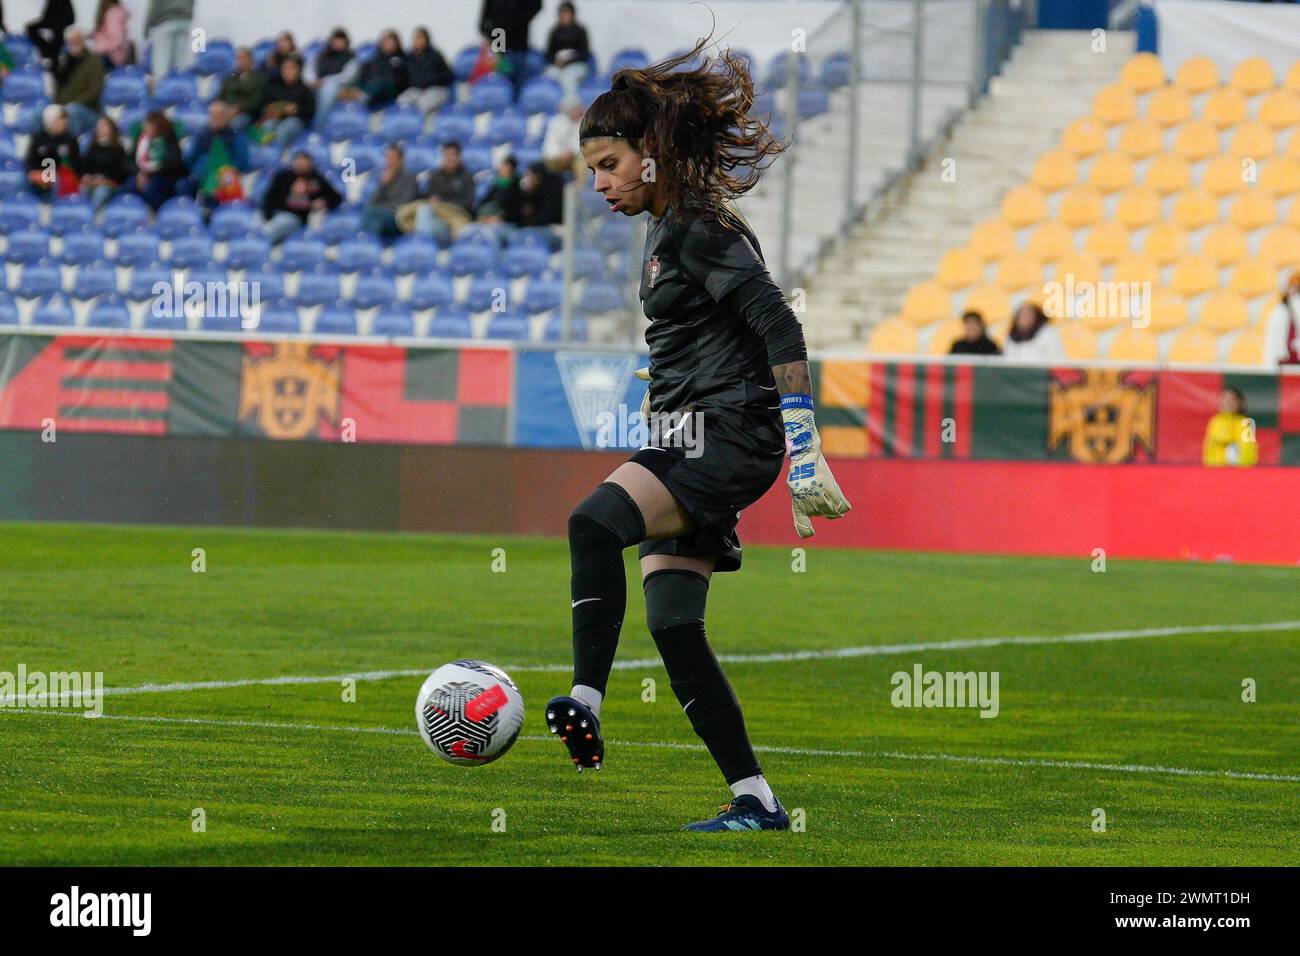 Leiria, Portugal. 17th Mar, 2021. Sporting Goalkeeper Ines Pereira warm up  during the women´s League Cup (2020/21) Final game between Benfica and  Sporting at the Estádio Municipal Dr. Magalhães Pessoa in Leiria